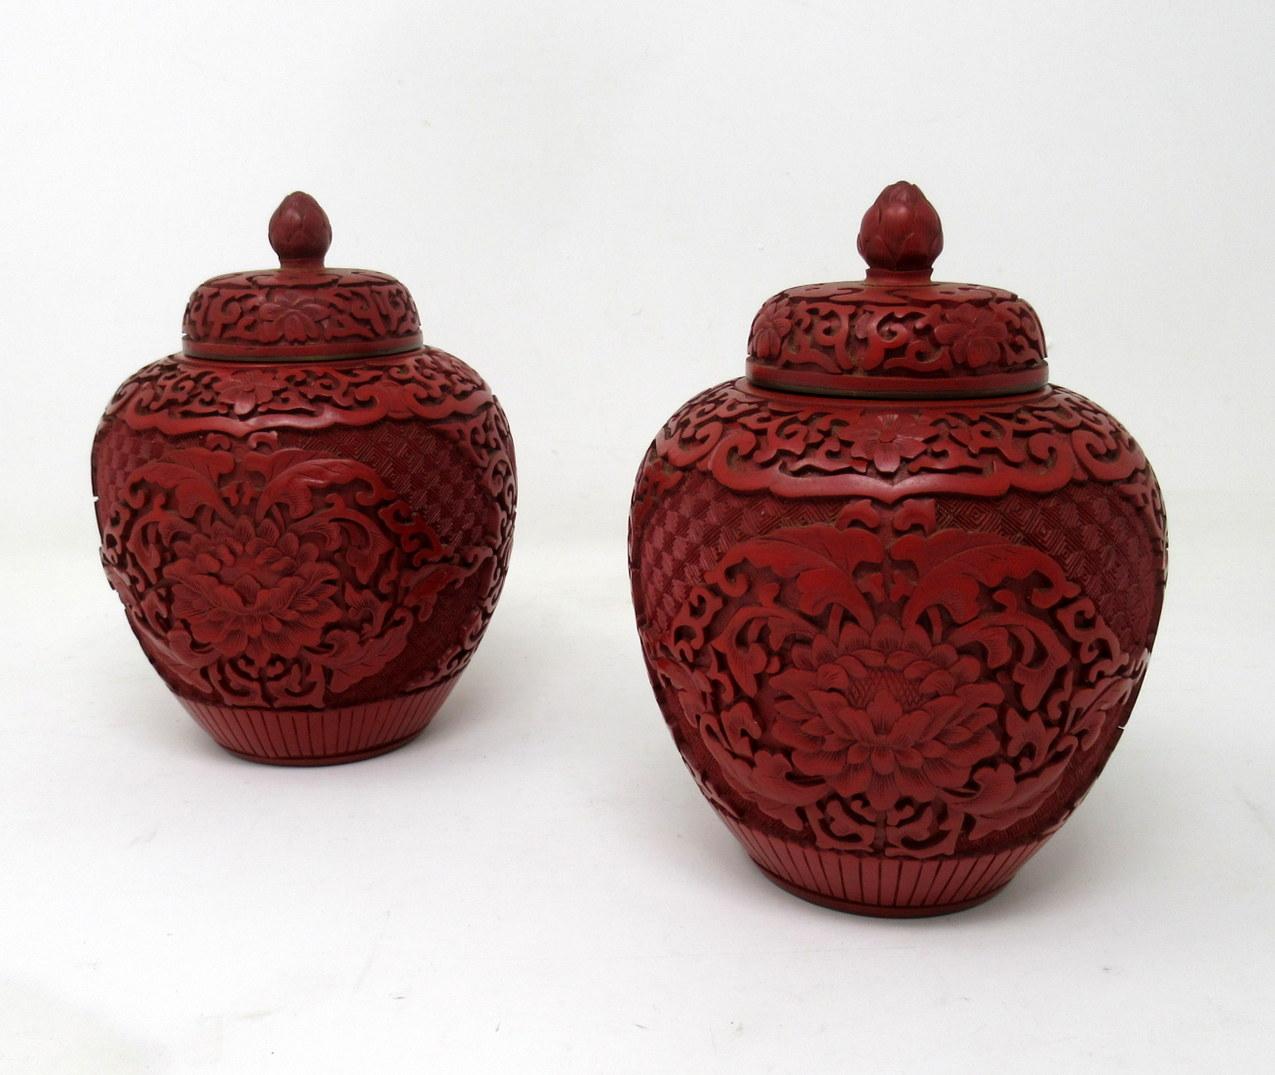 Stunning Identical pair of Chinese hand carved cinnabar lacquer bowls and covers of outstanding quality, made during the last quarter of the 19th century. Guangxu Period 1875-1908. 

The short neck deep rounded bulbous body above a carved reeded